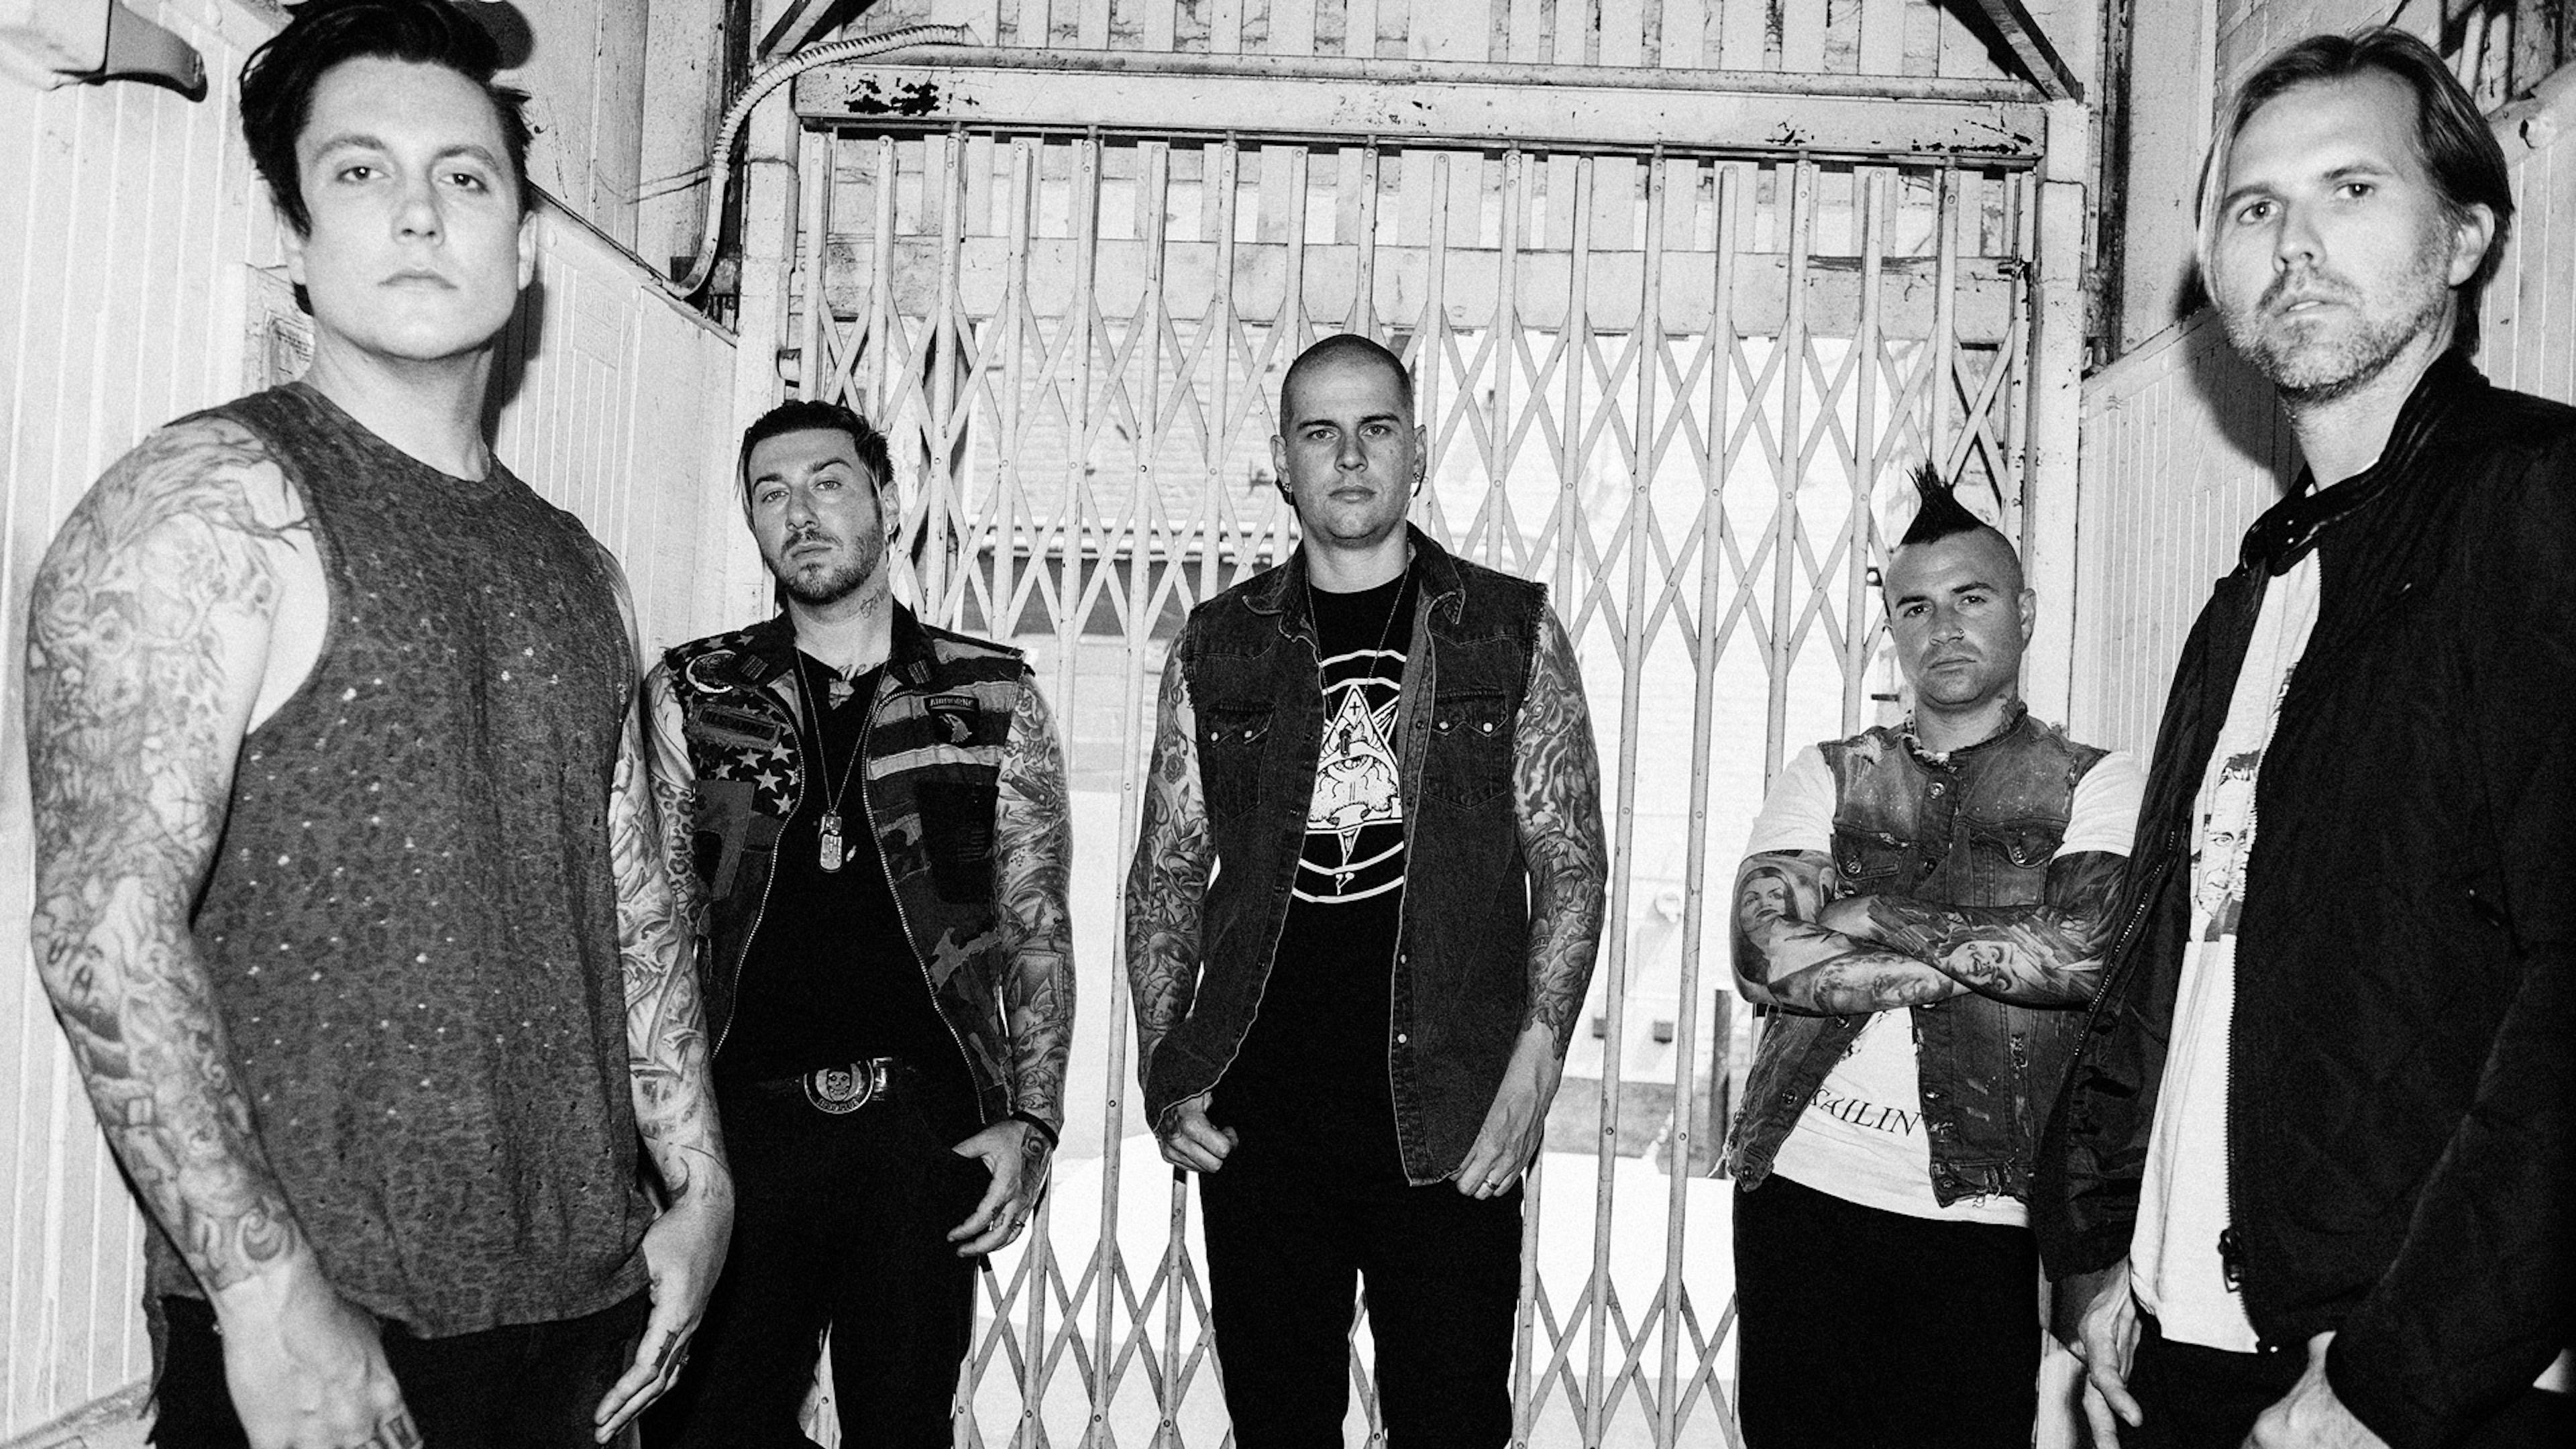 You Can Play As Avenged Sevenfold's M. Shadows In The New… Kerrang!